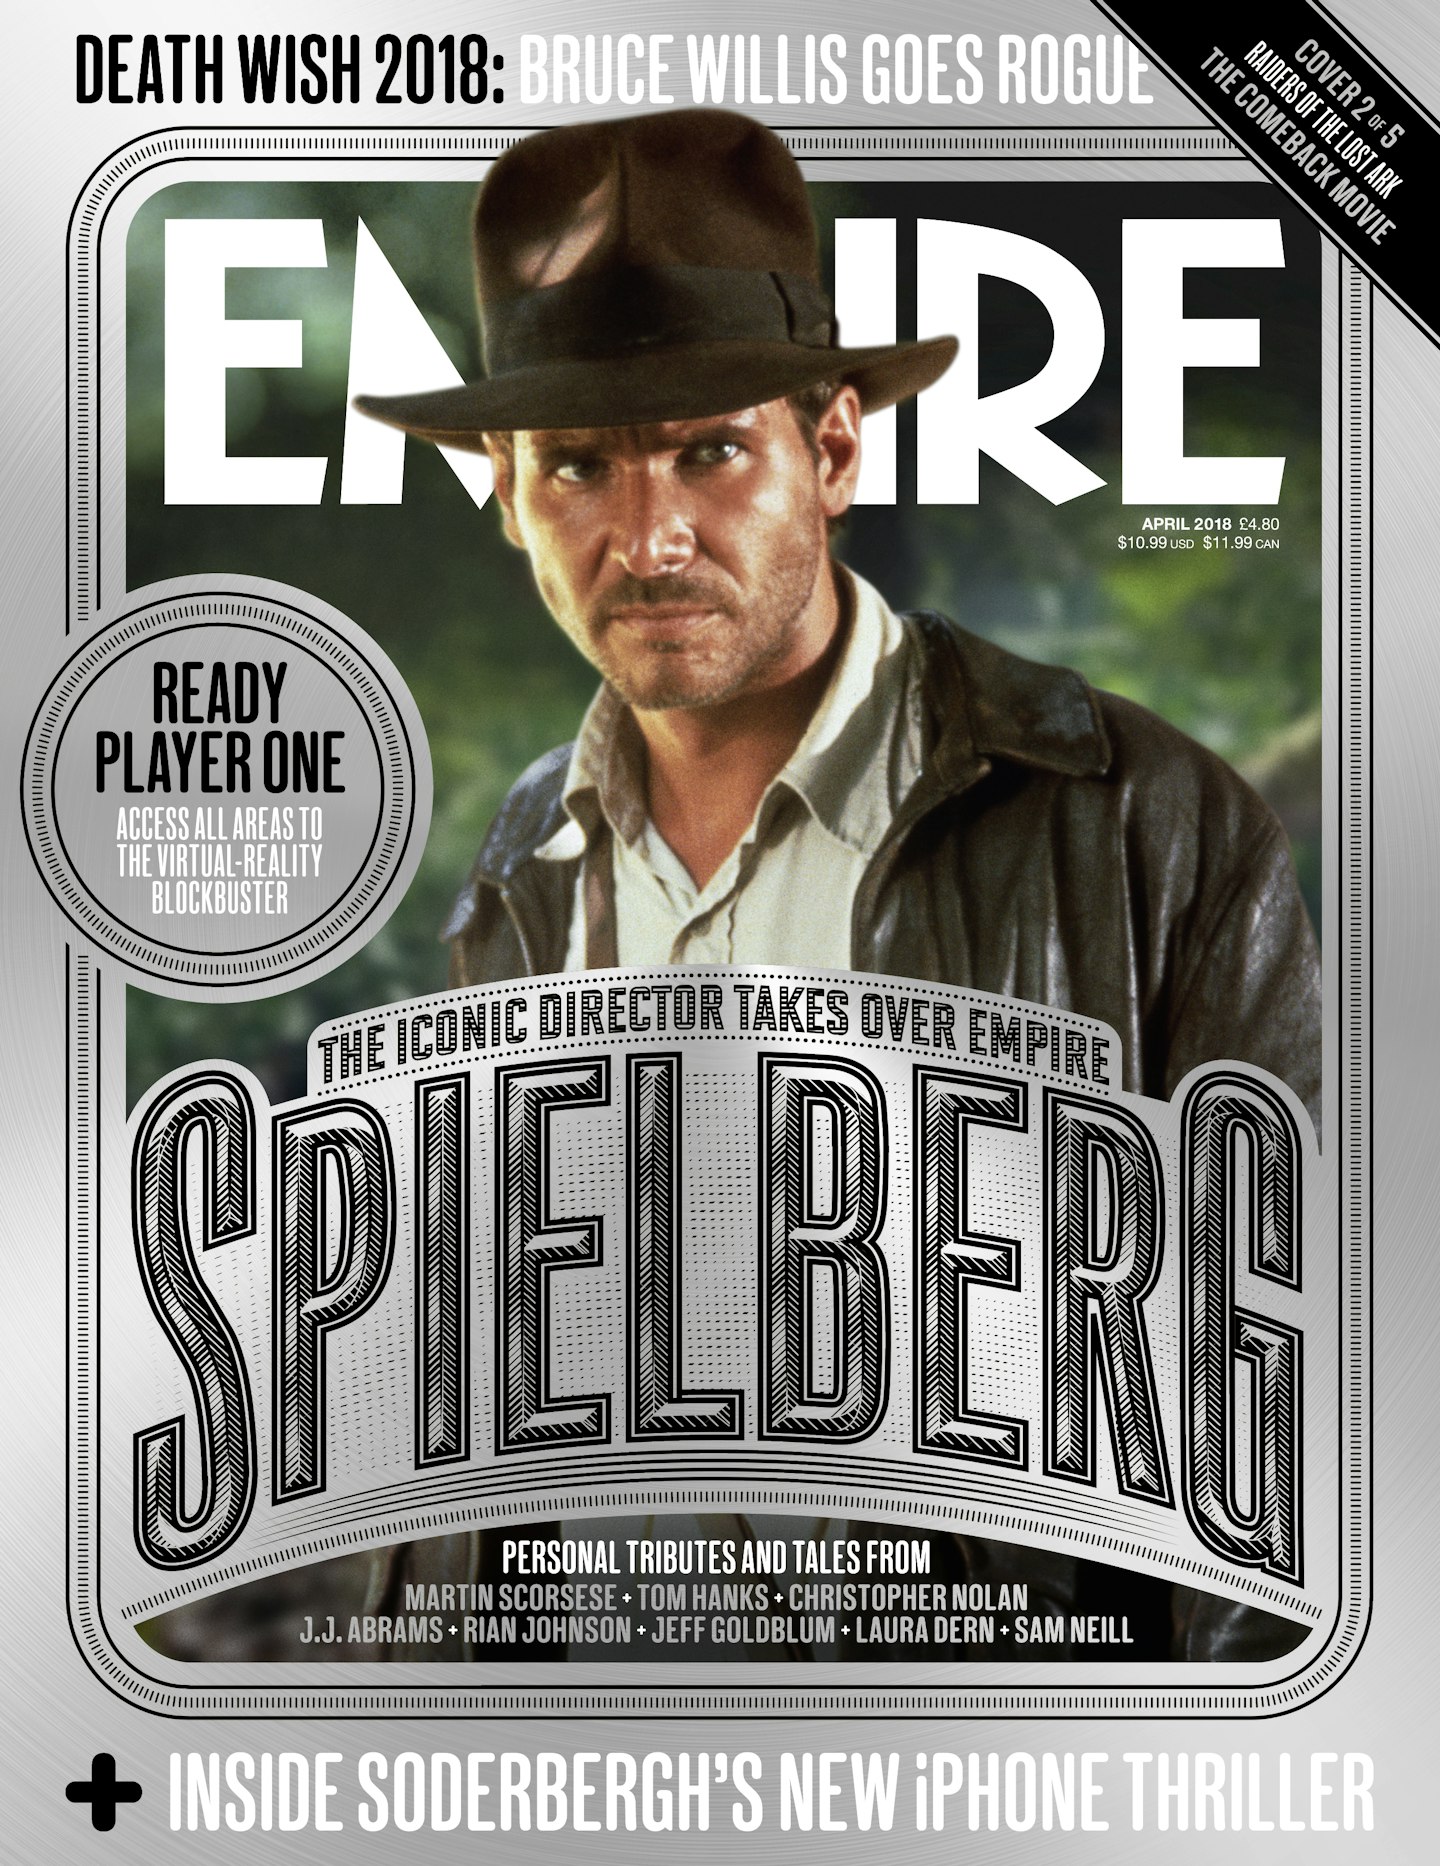 Empire - April 2018 covers Spielberg Takeover